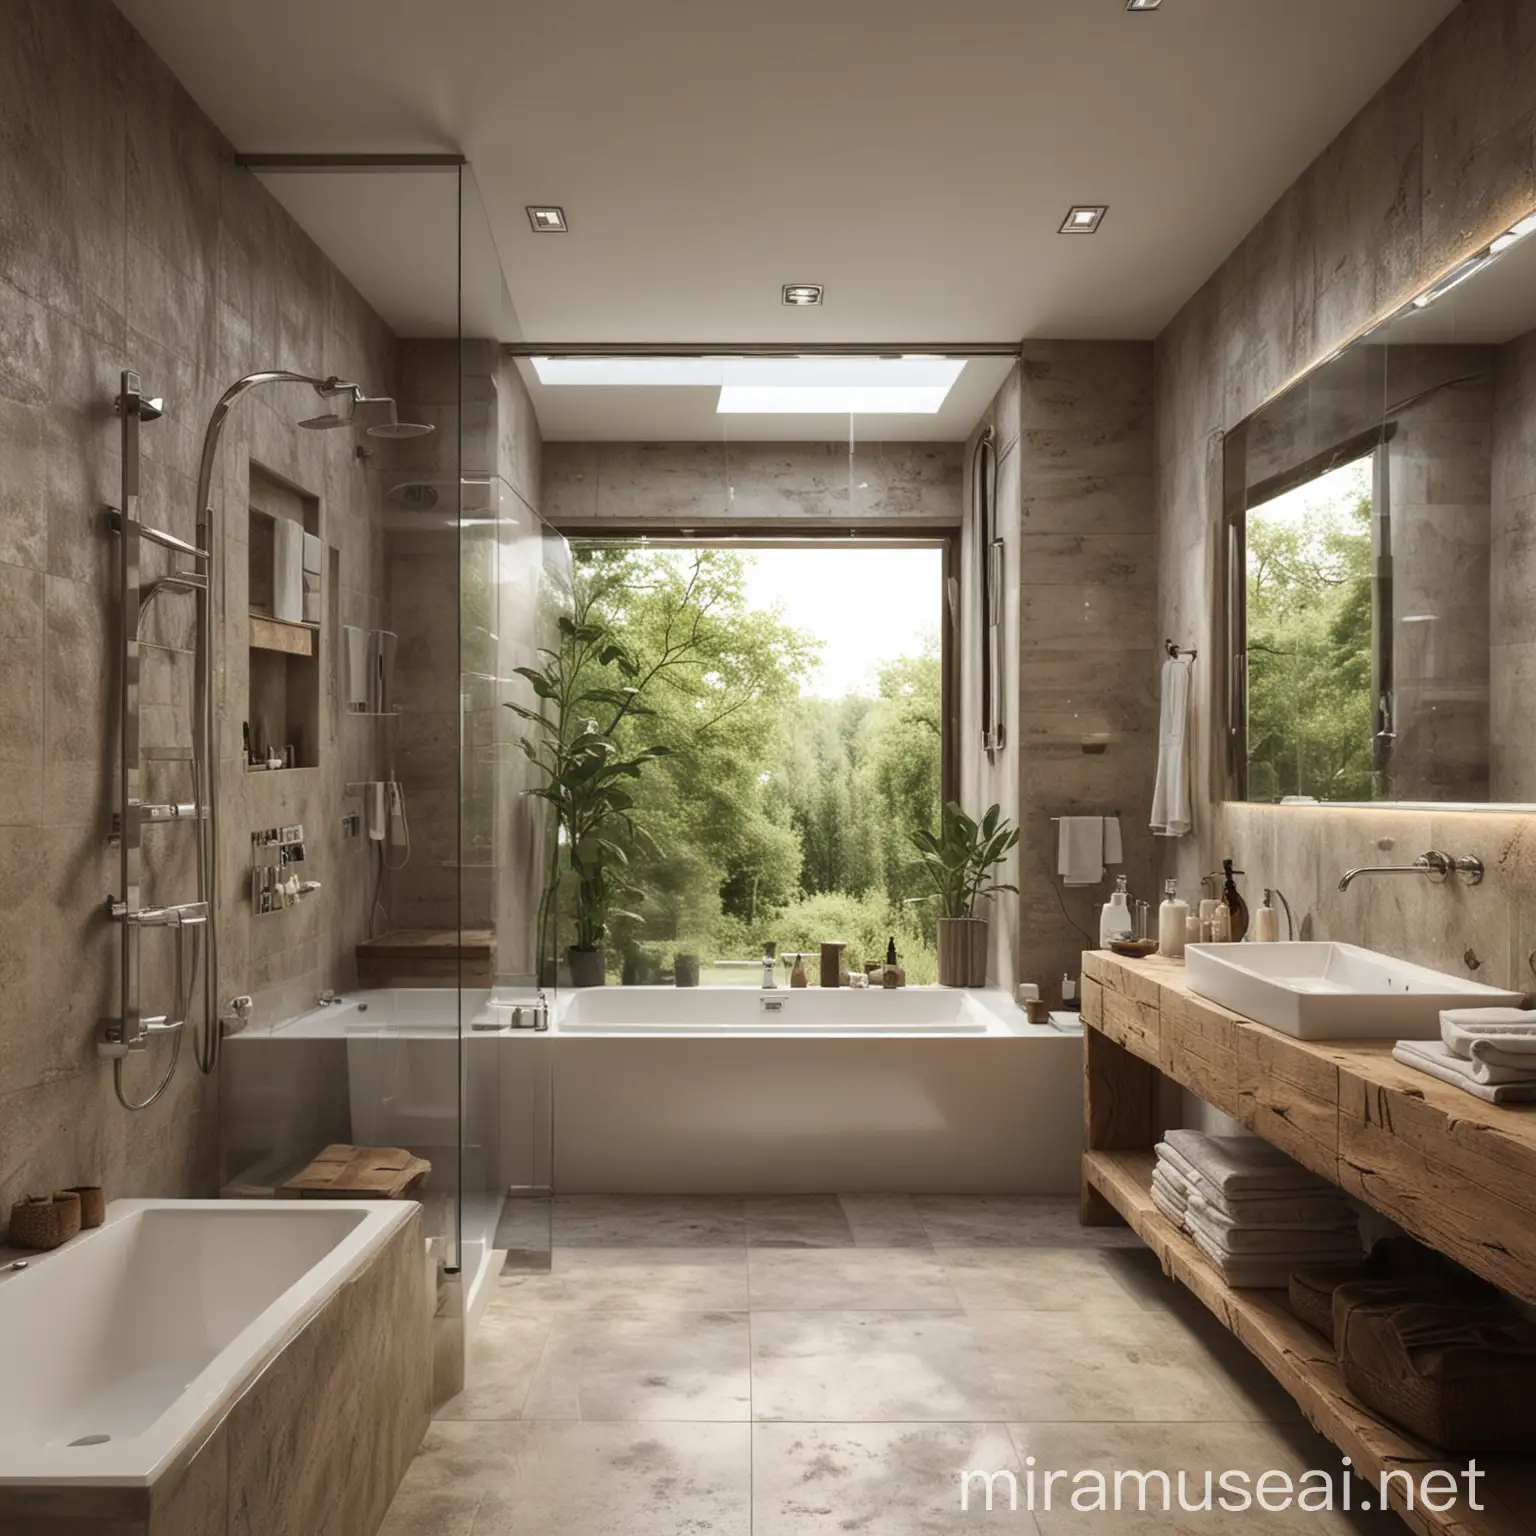 modern bathroom in the style of the source image